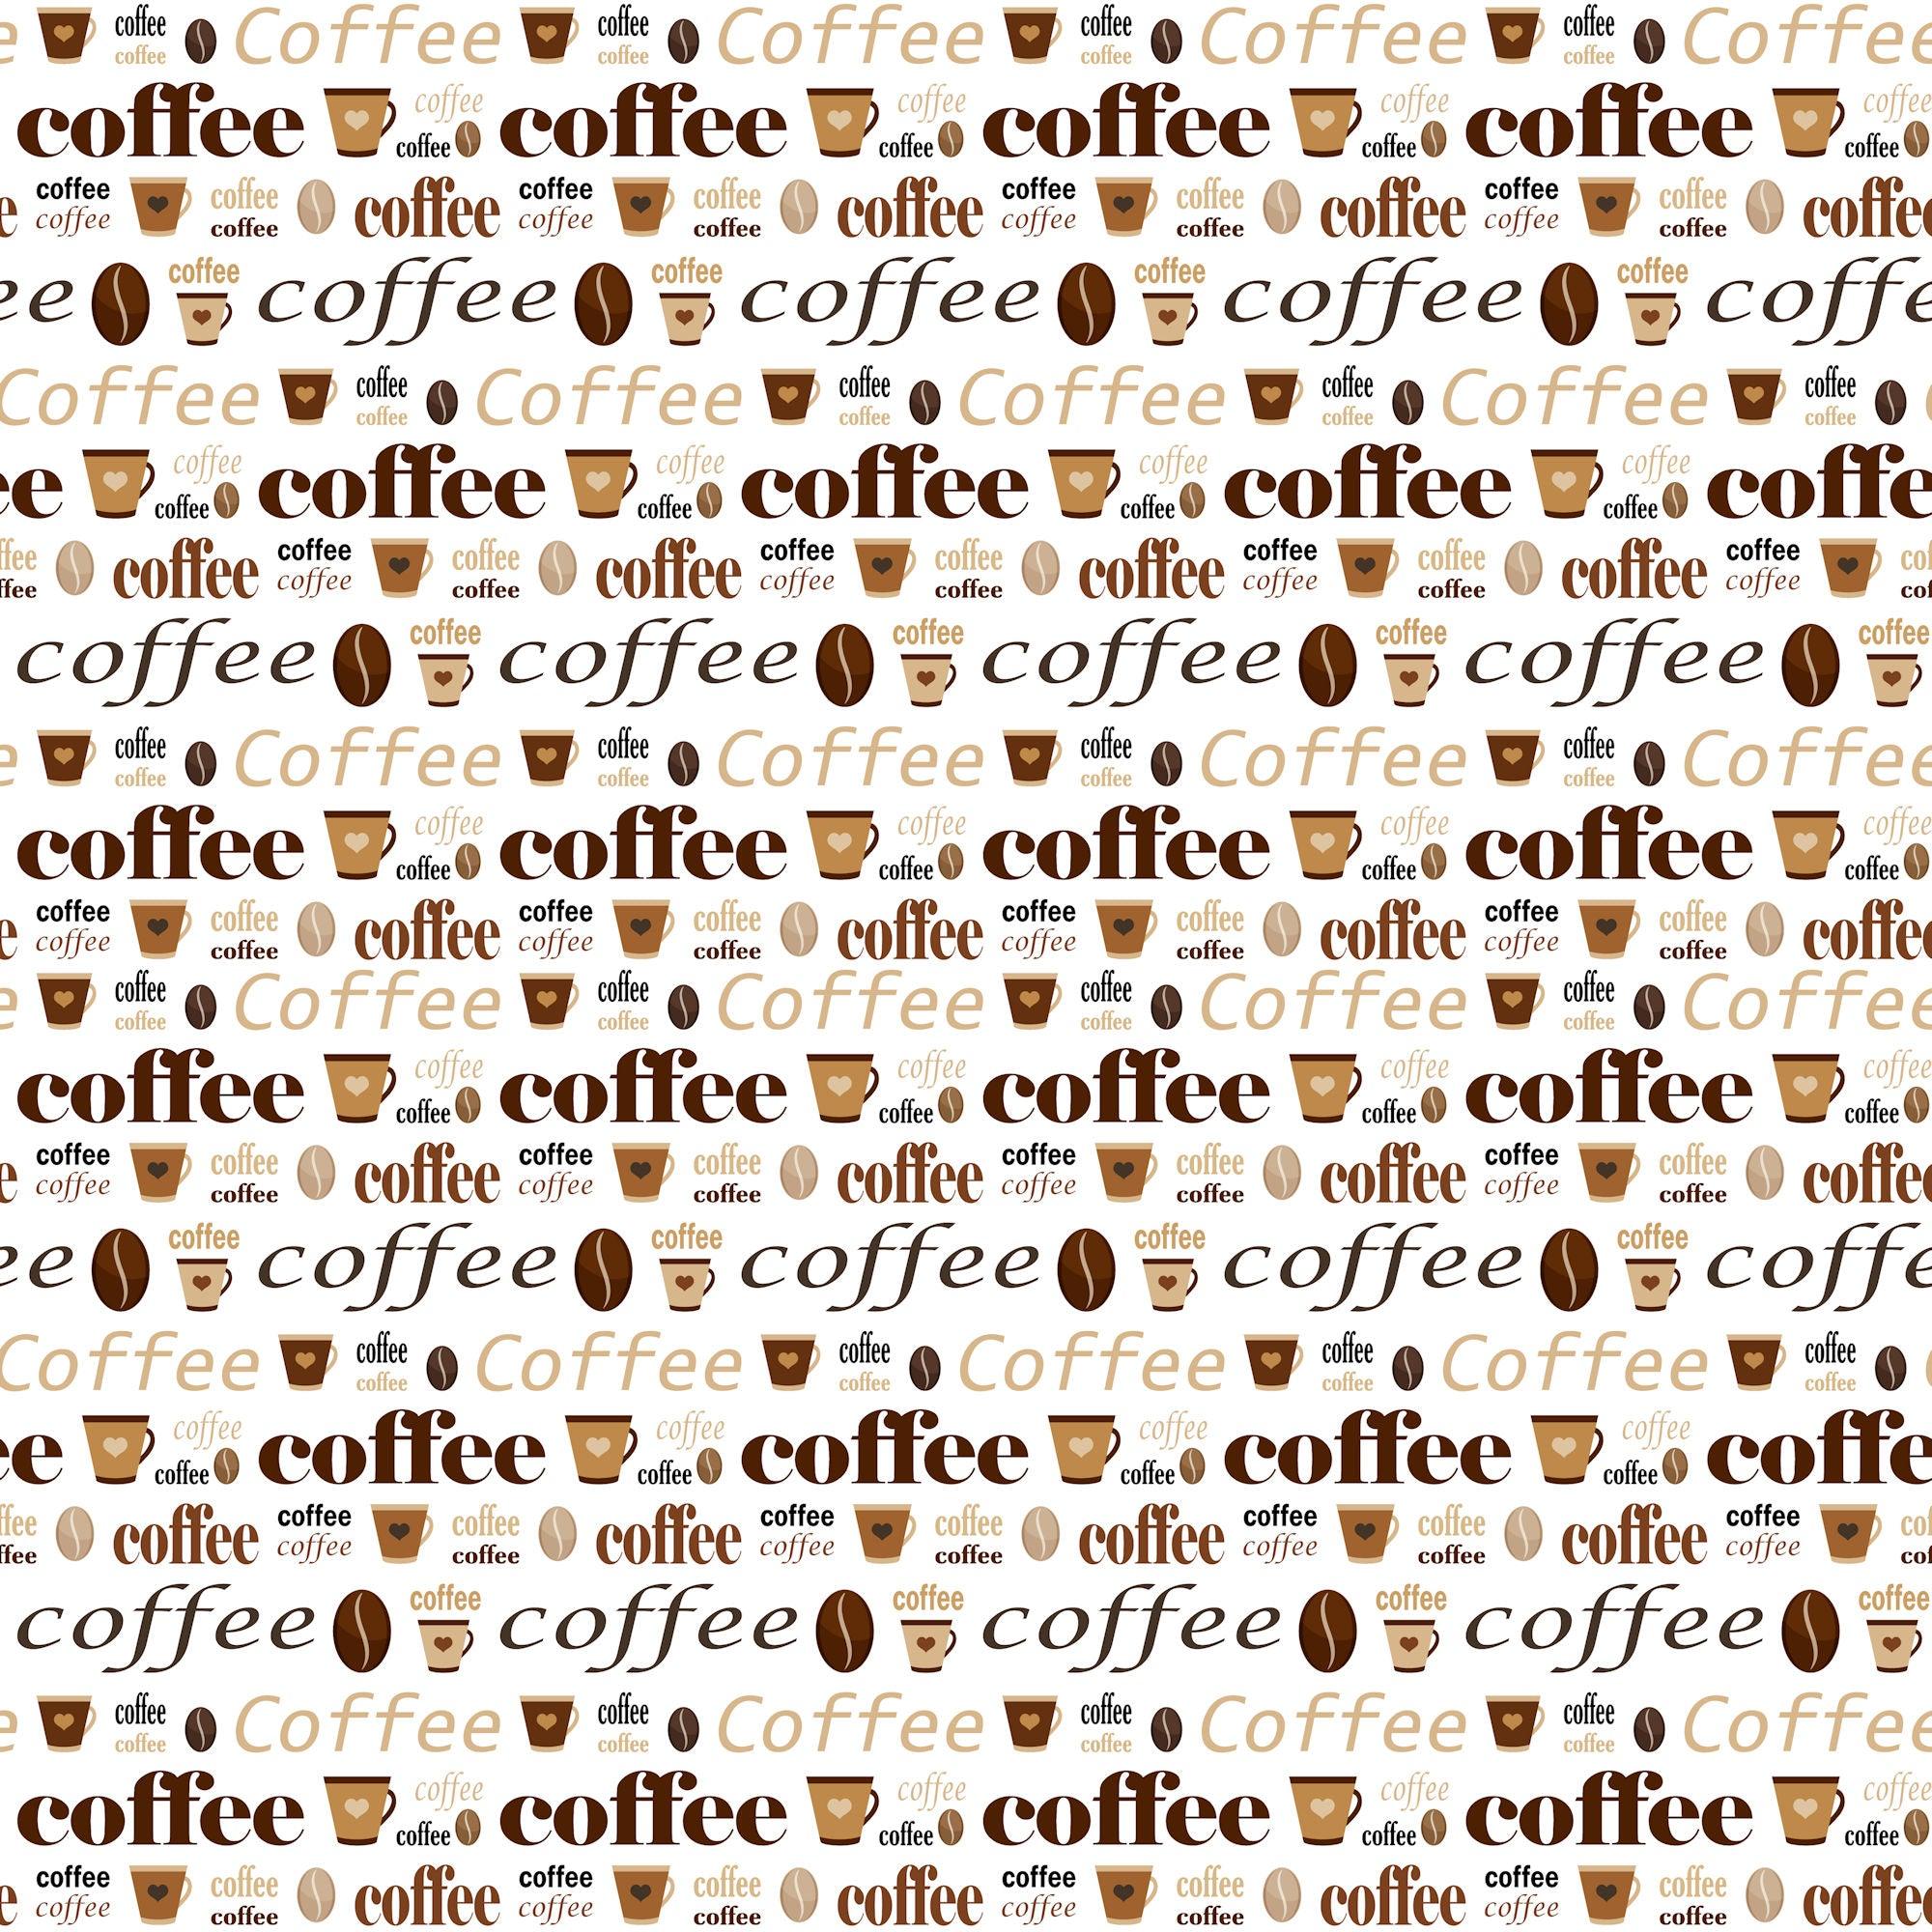 Coffee Lover Collection Oh Beans 12 x 12 Double-Sided Scrapbook Paper by SSC Designs - Scrapbook Supply Companies